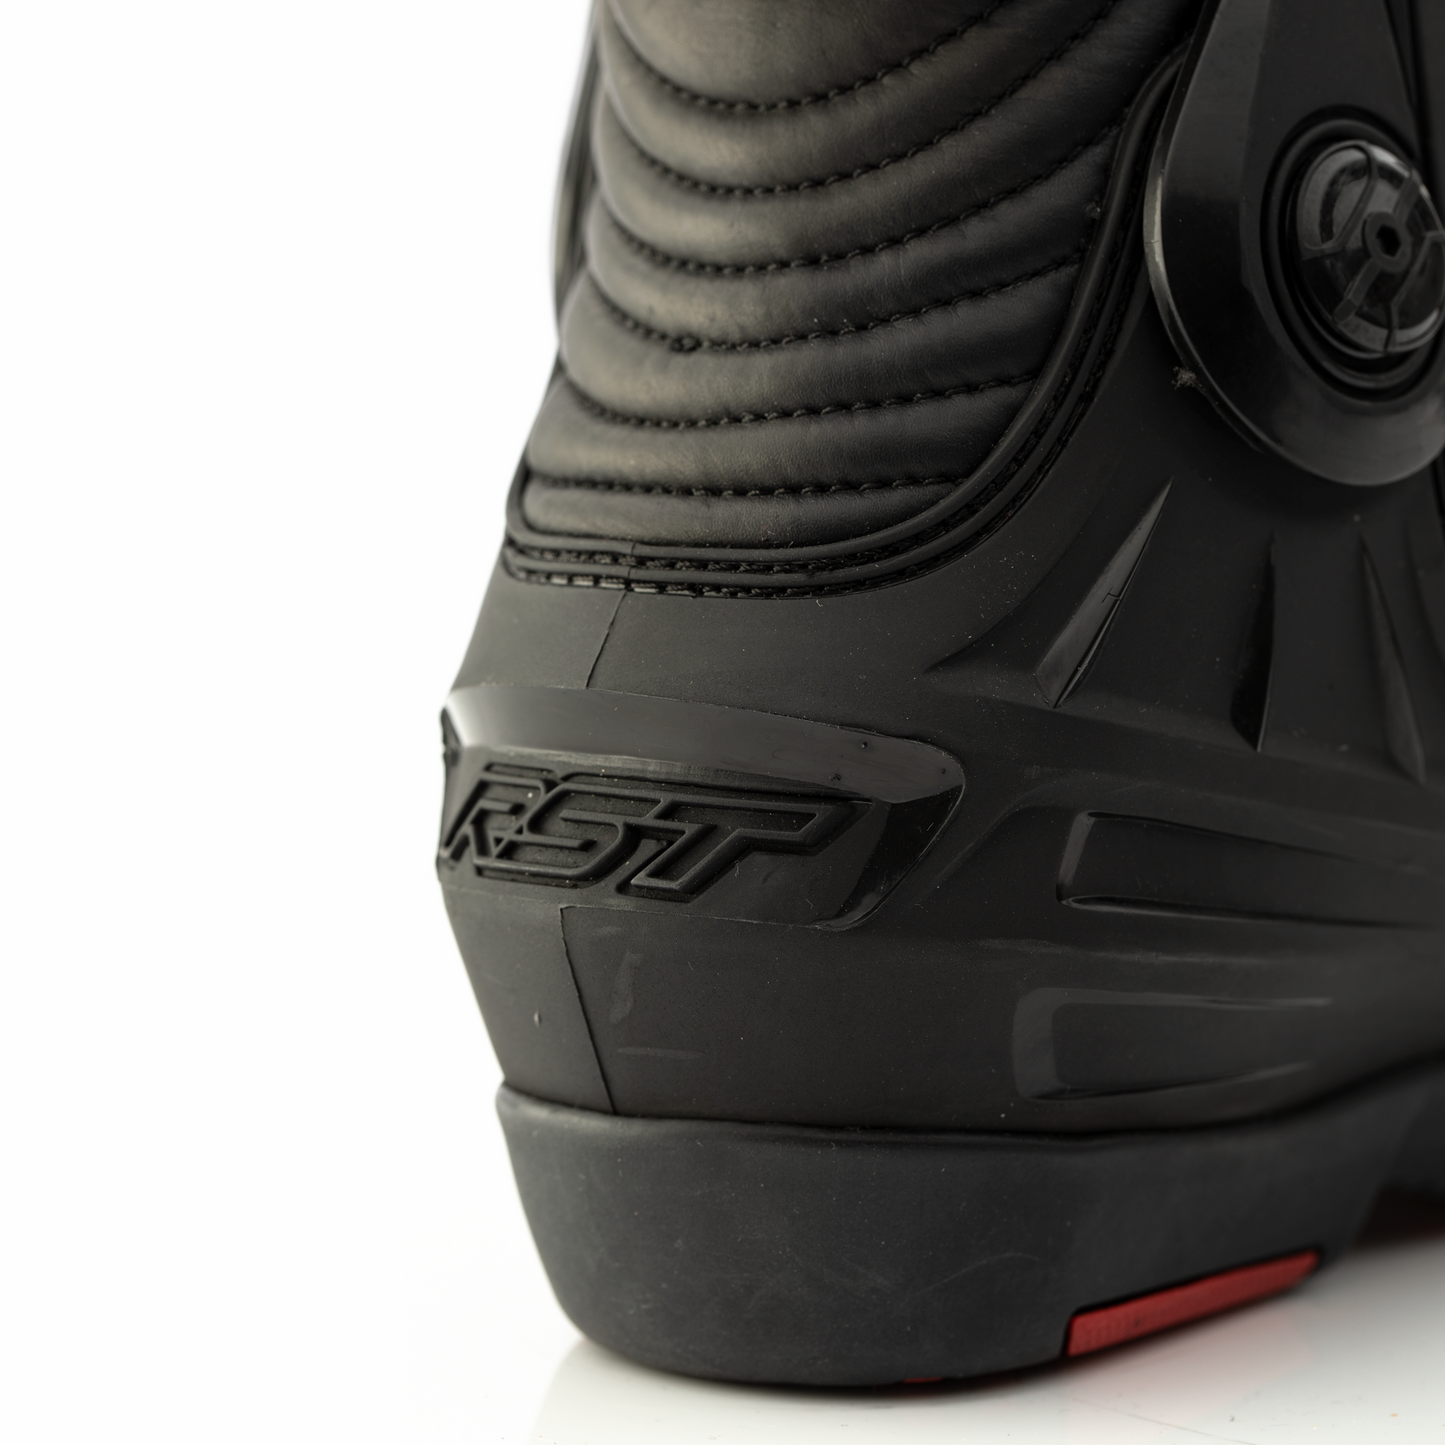 RST Tractech Evo III 3 CE Boots - Black